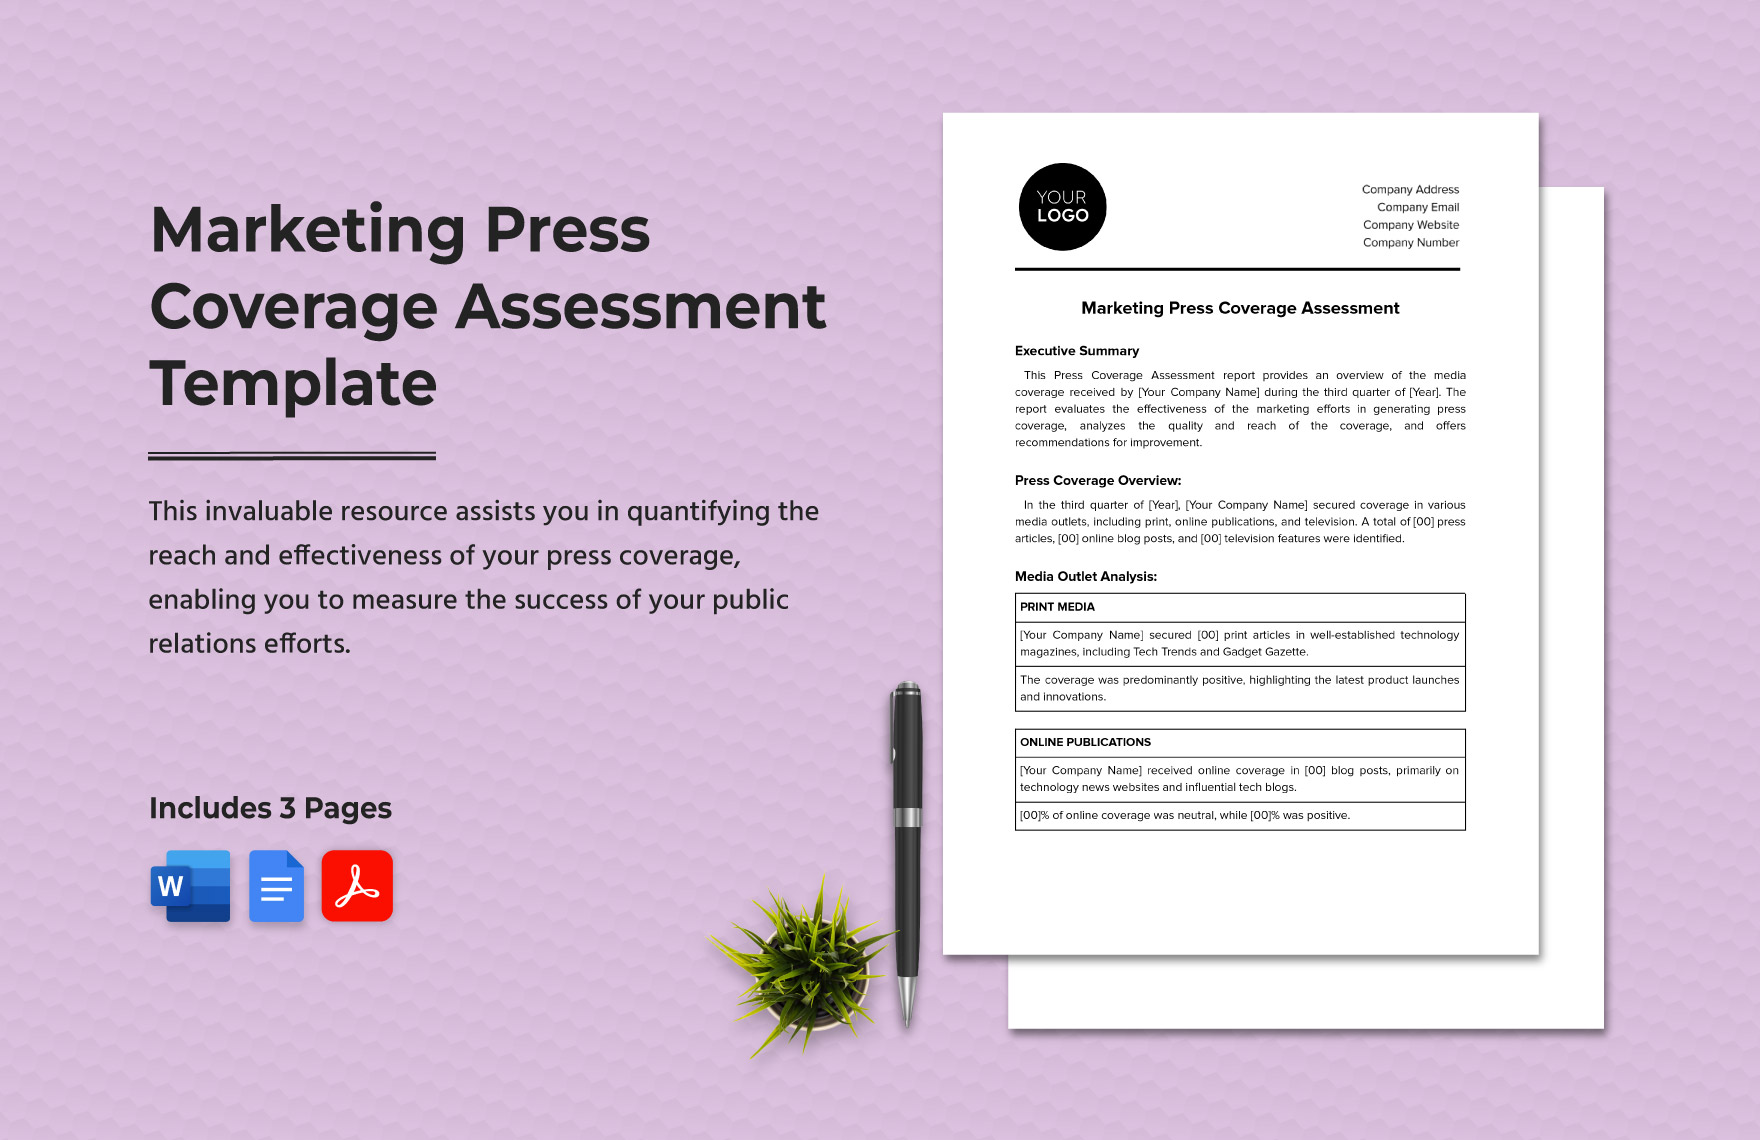 Marketing Press Coverage Assessment Template